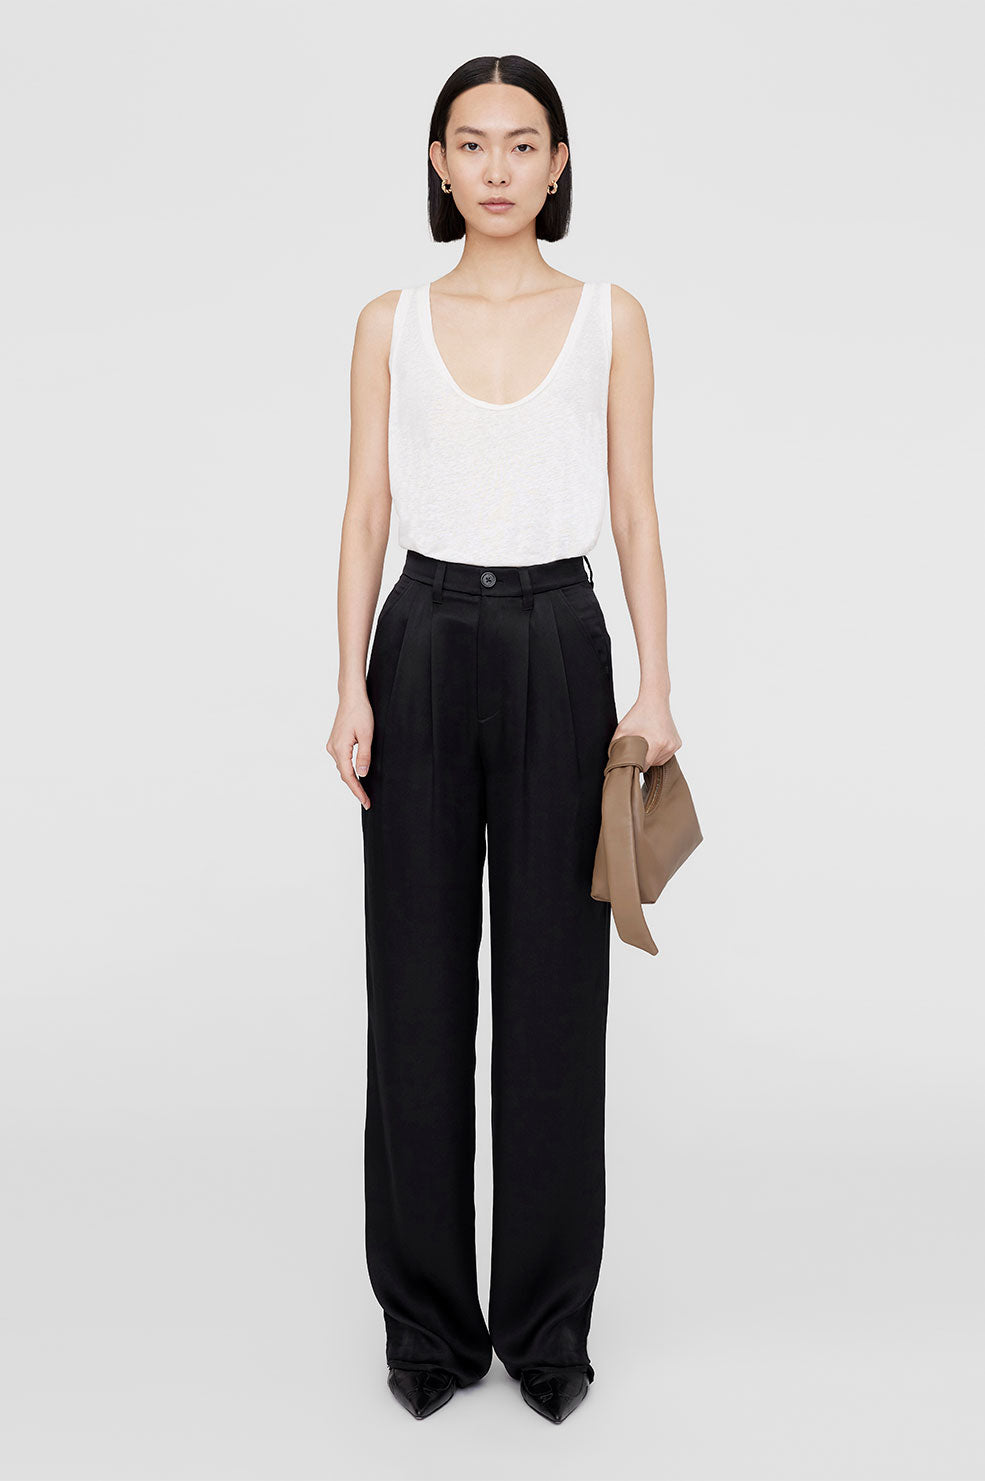 ANINE BING Carrie Pant - Black Silk - On Model Front